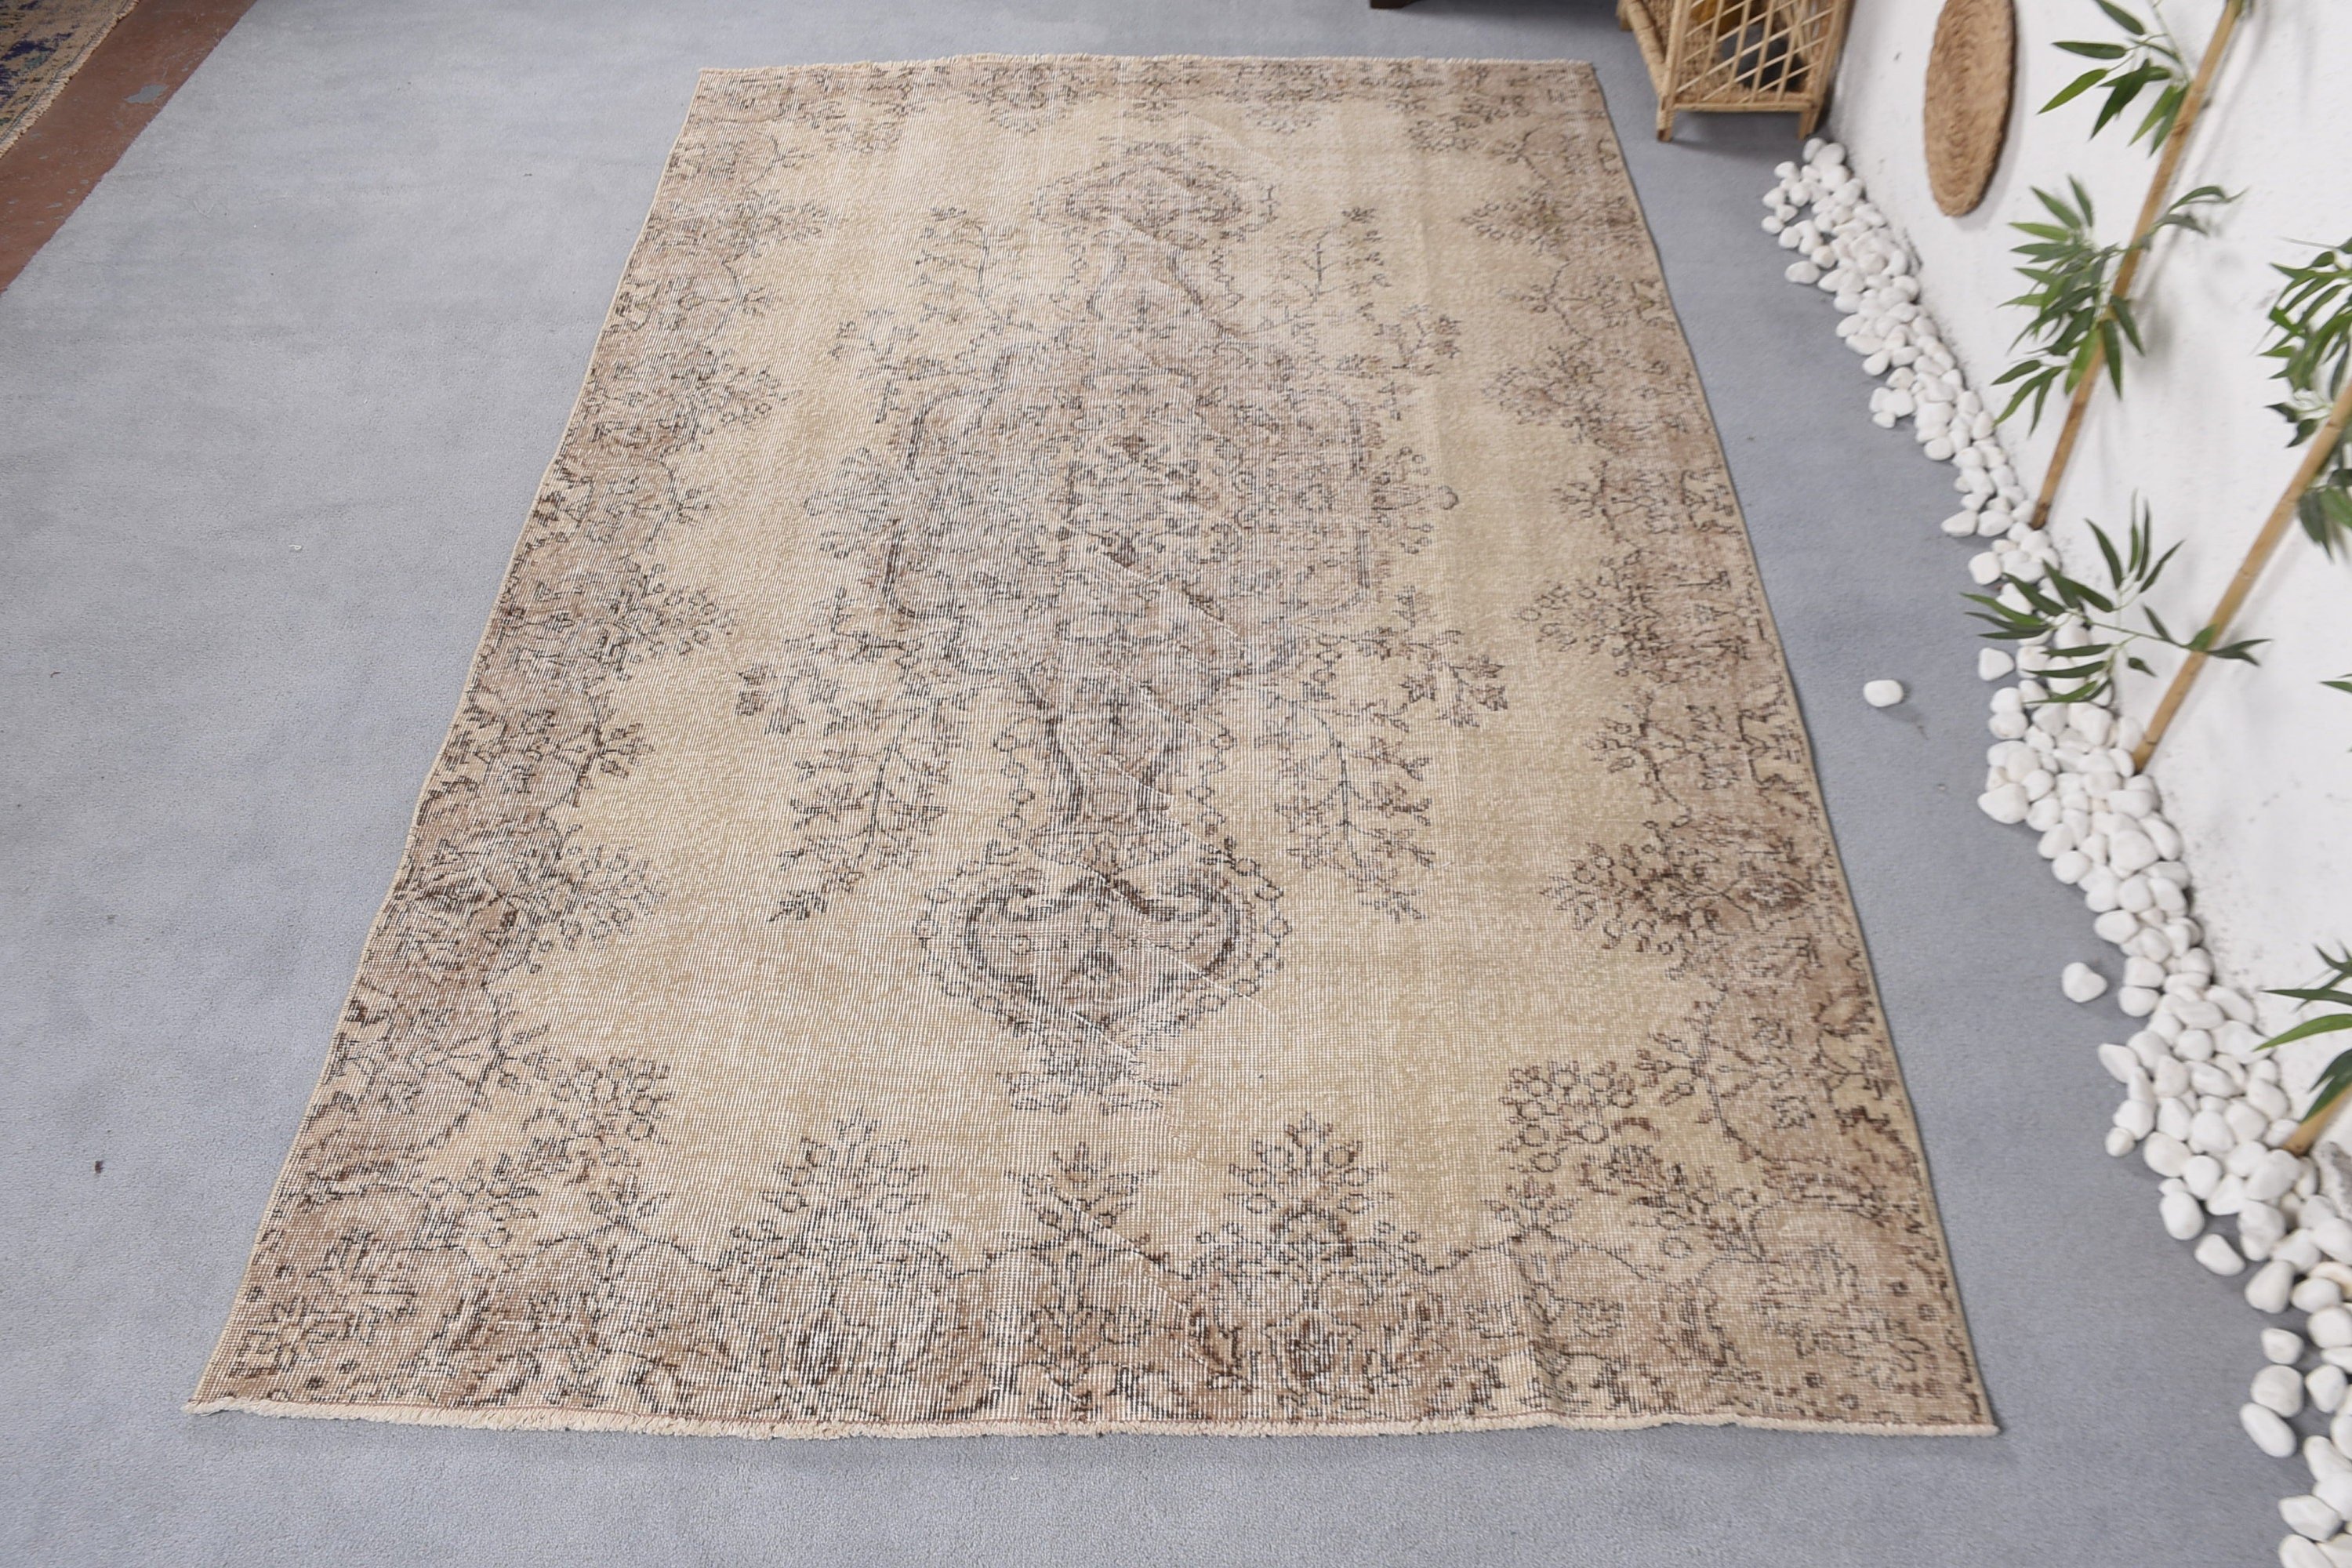 Beige Home Decor Rugs, Dining Room Rug, Salon Rugs, 5.7x9 ft Large Rug, Abstract Rug, Antique Rug, Oushak Rugs, Turkish Rugs, Vintage Rugs